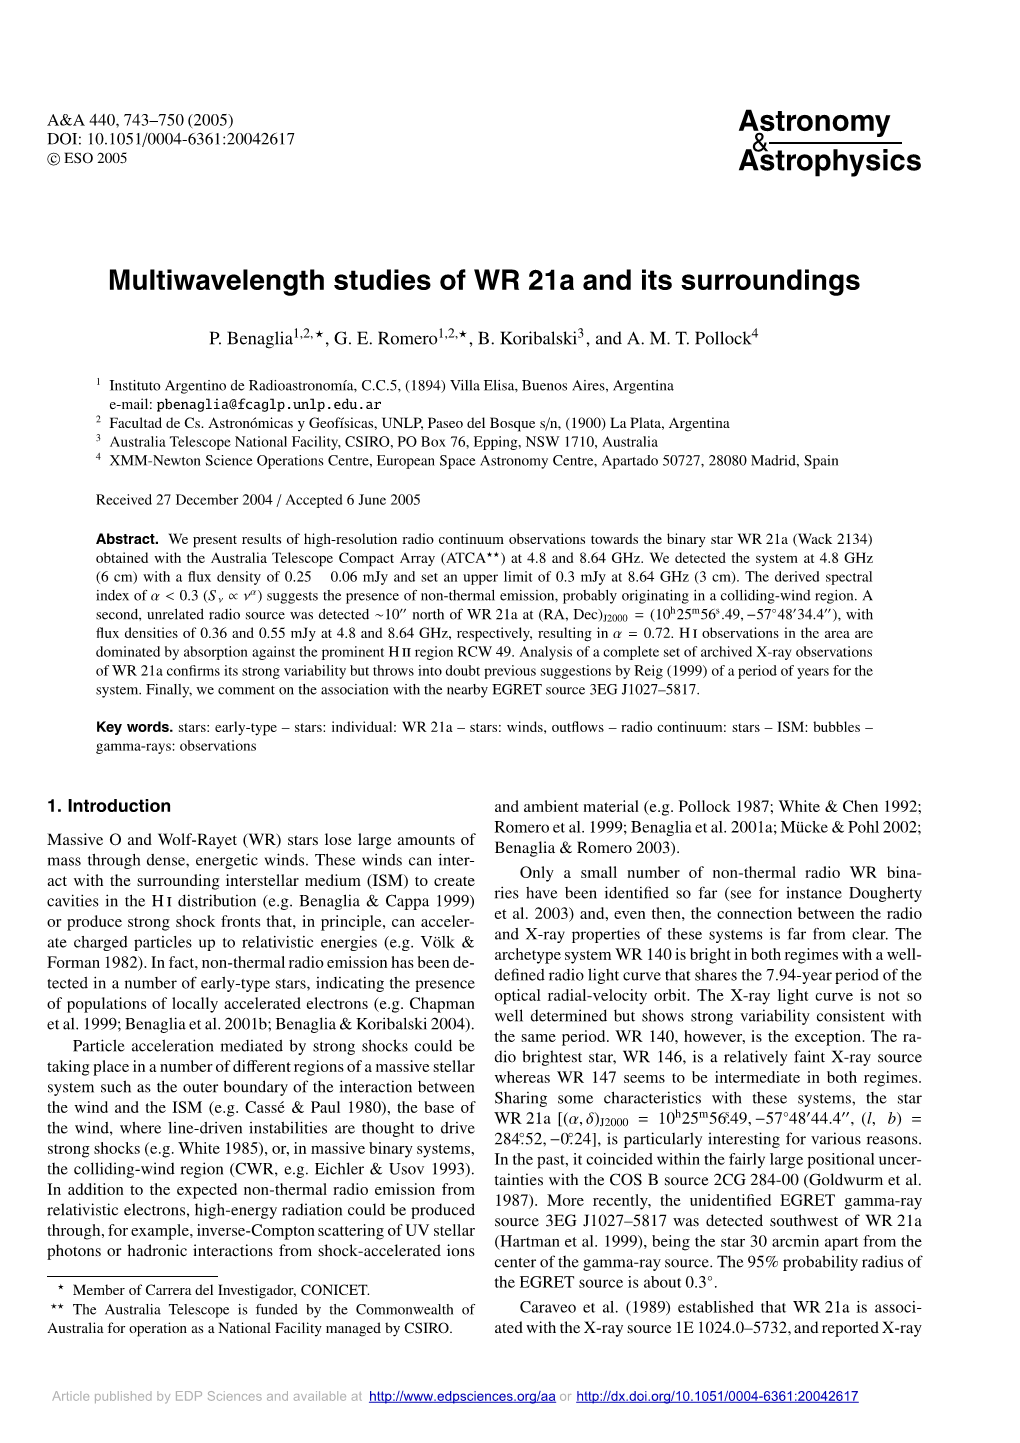 Multiwavelength Studies of WR 21A and Its Surroundings